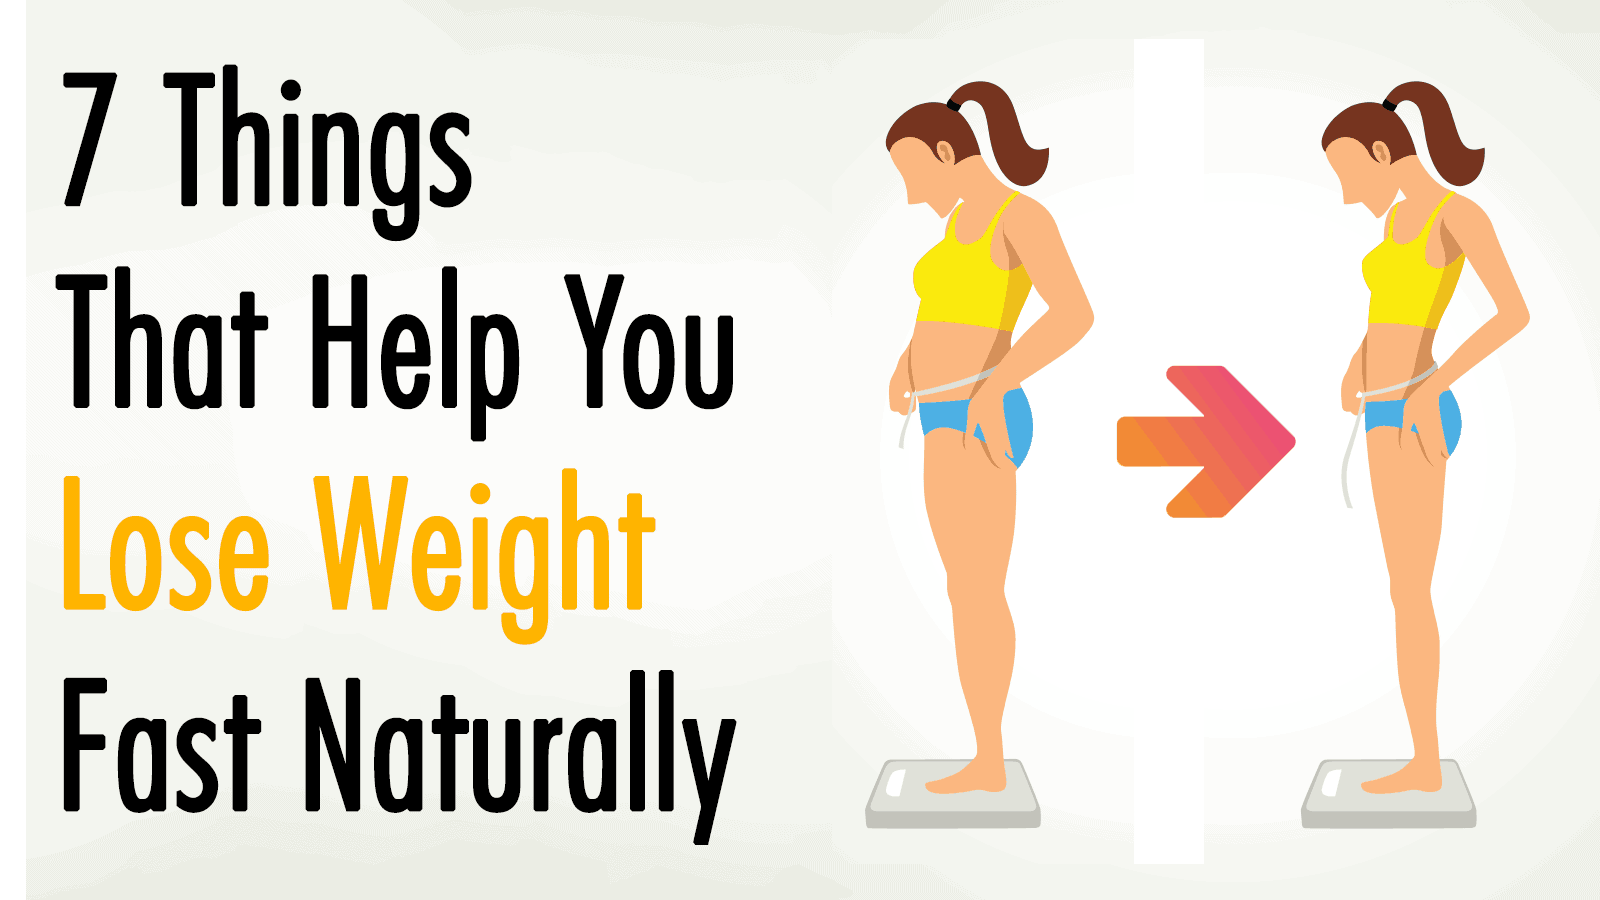 7 Things That Help You Lose Weight Fast Naturally